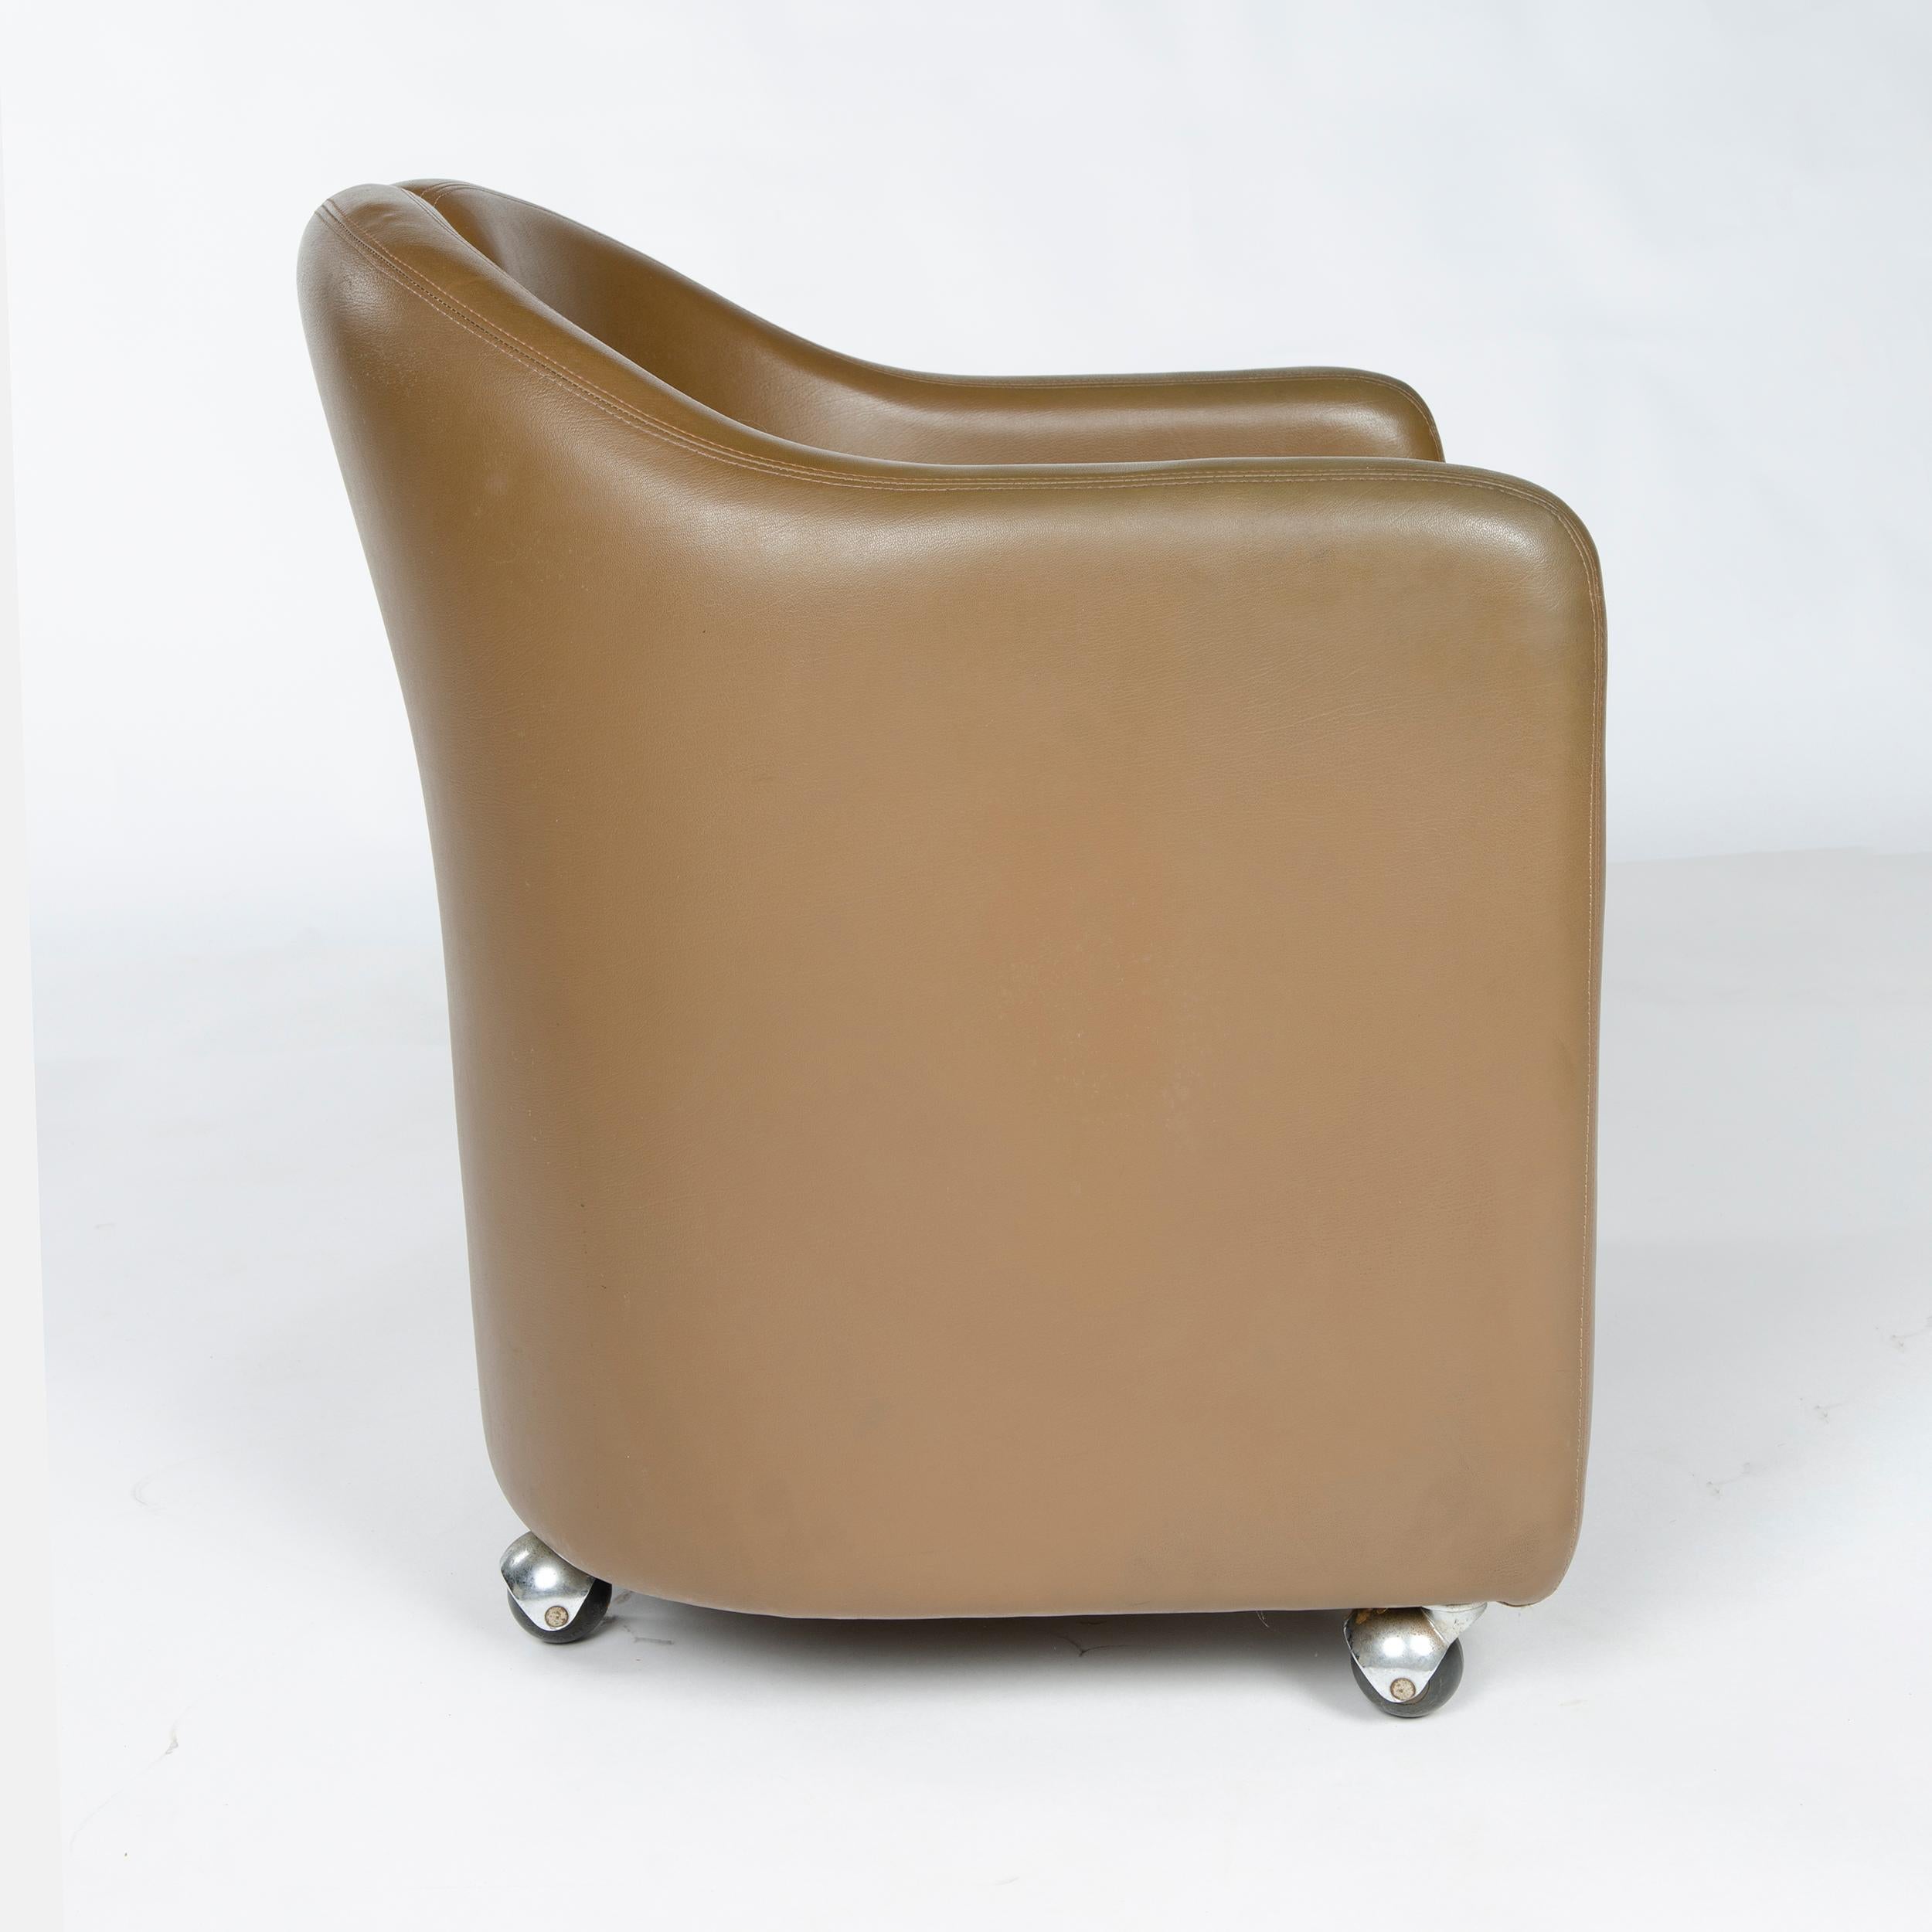 Upholstery 1970s Italian Barrel-Back Desk or Cocktail Chair by Eugenio Gerli for Tecno For Sale